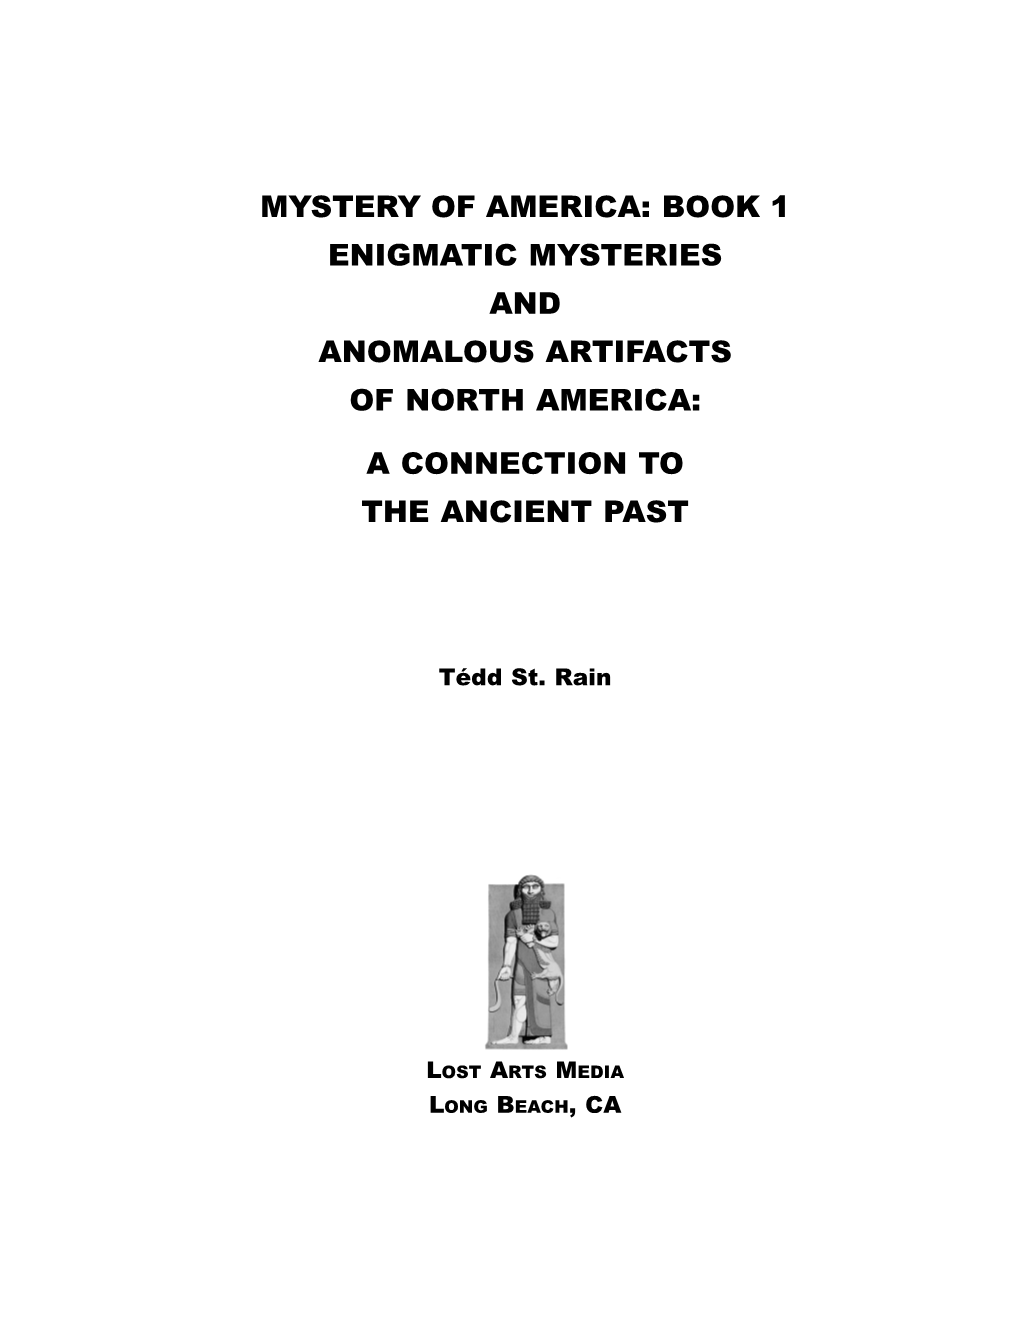 Mystery of America: Book 1 Enigmatic Mysteries and Anomalous Artifacts of North America